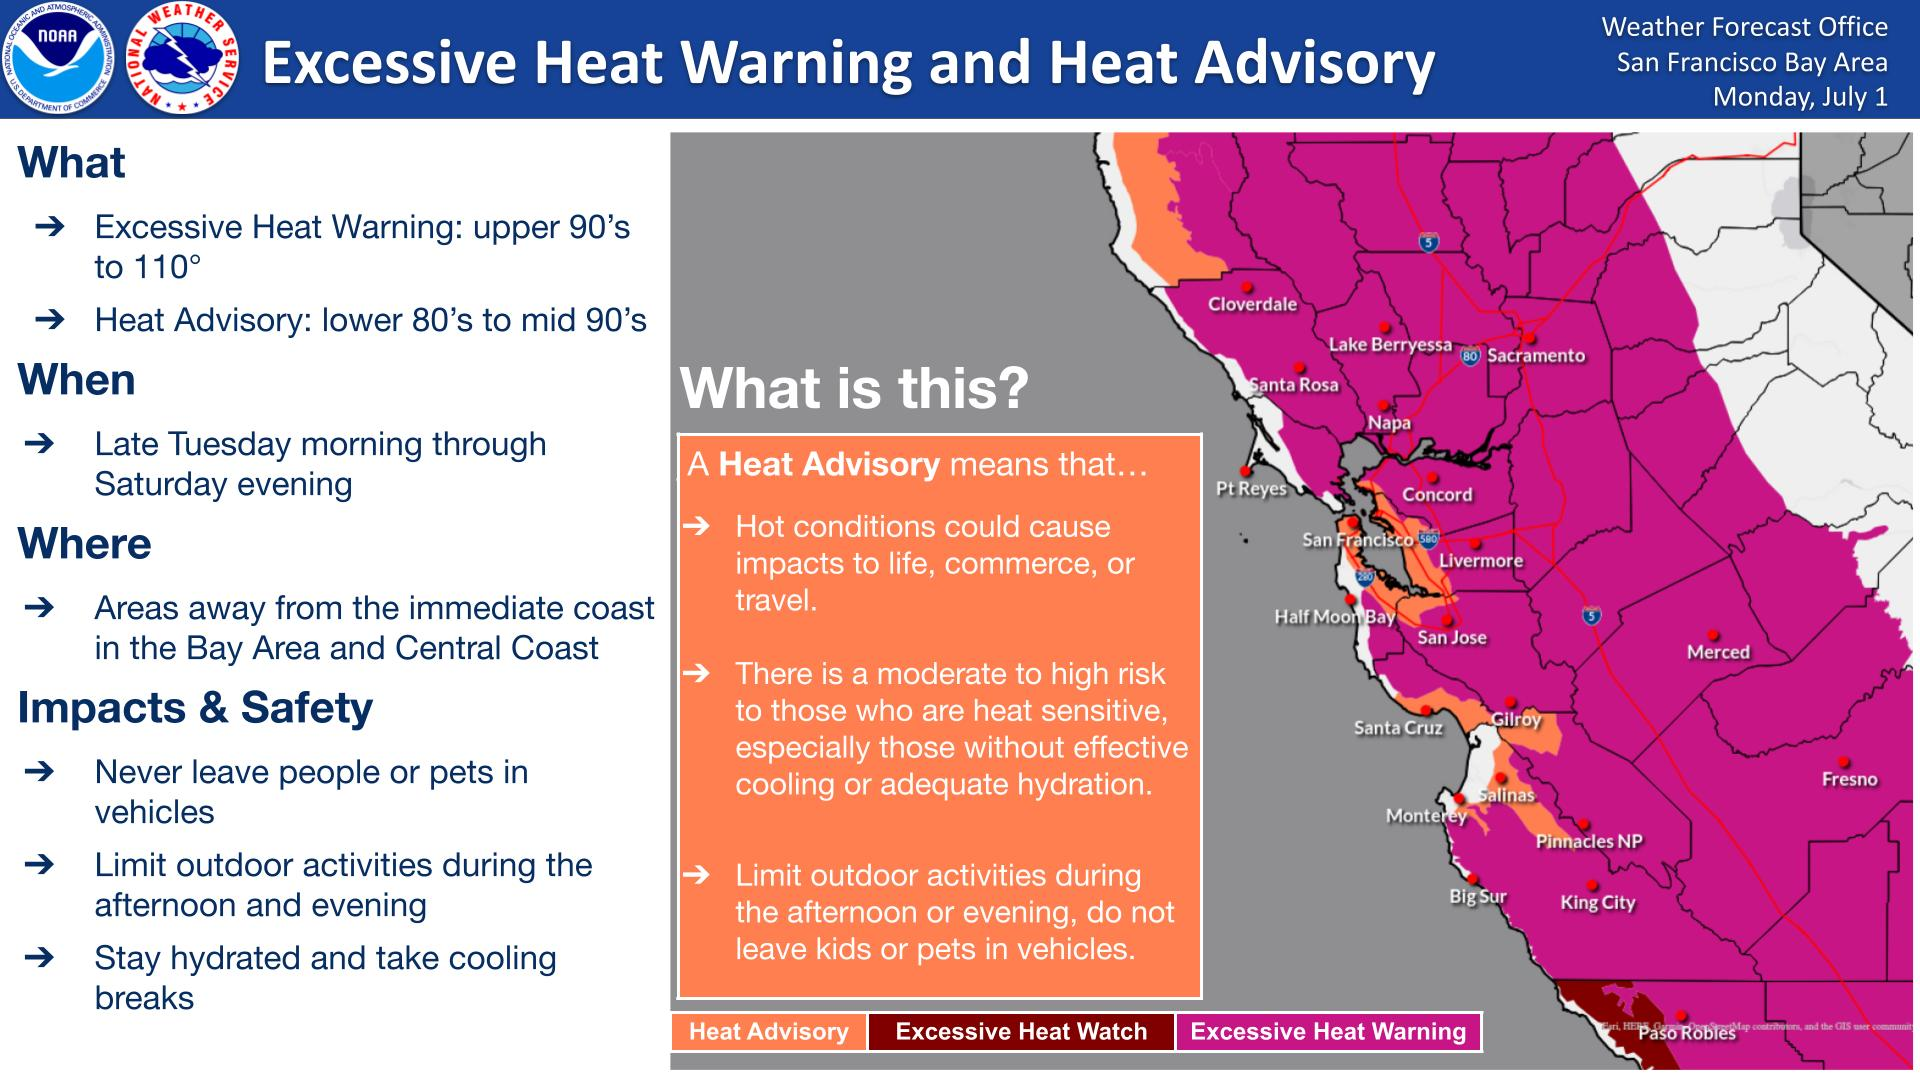 Excessive Heat Warning for July 2 - 9: Cooling & Safety Resources